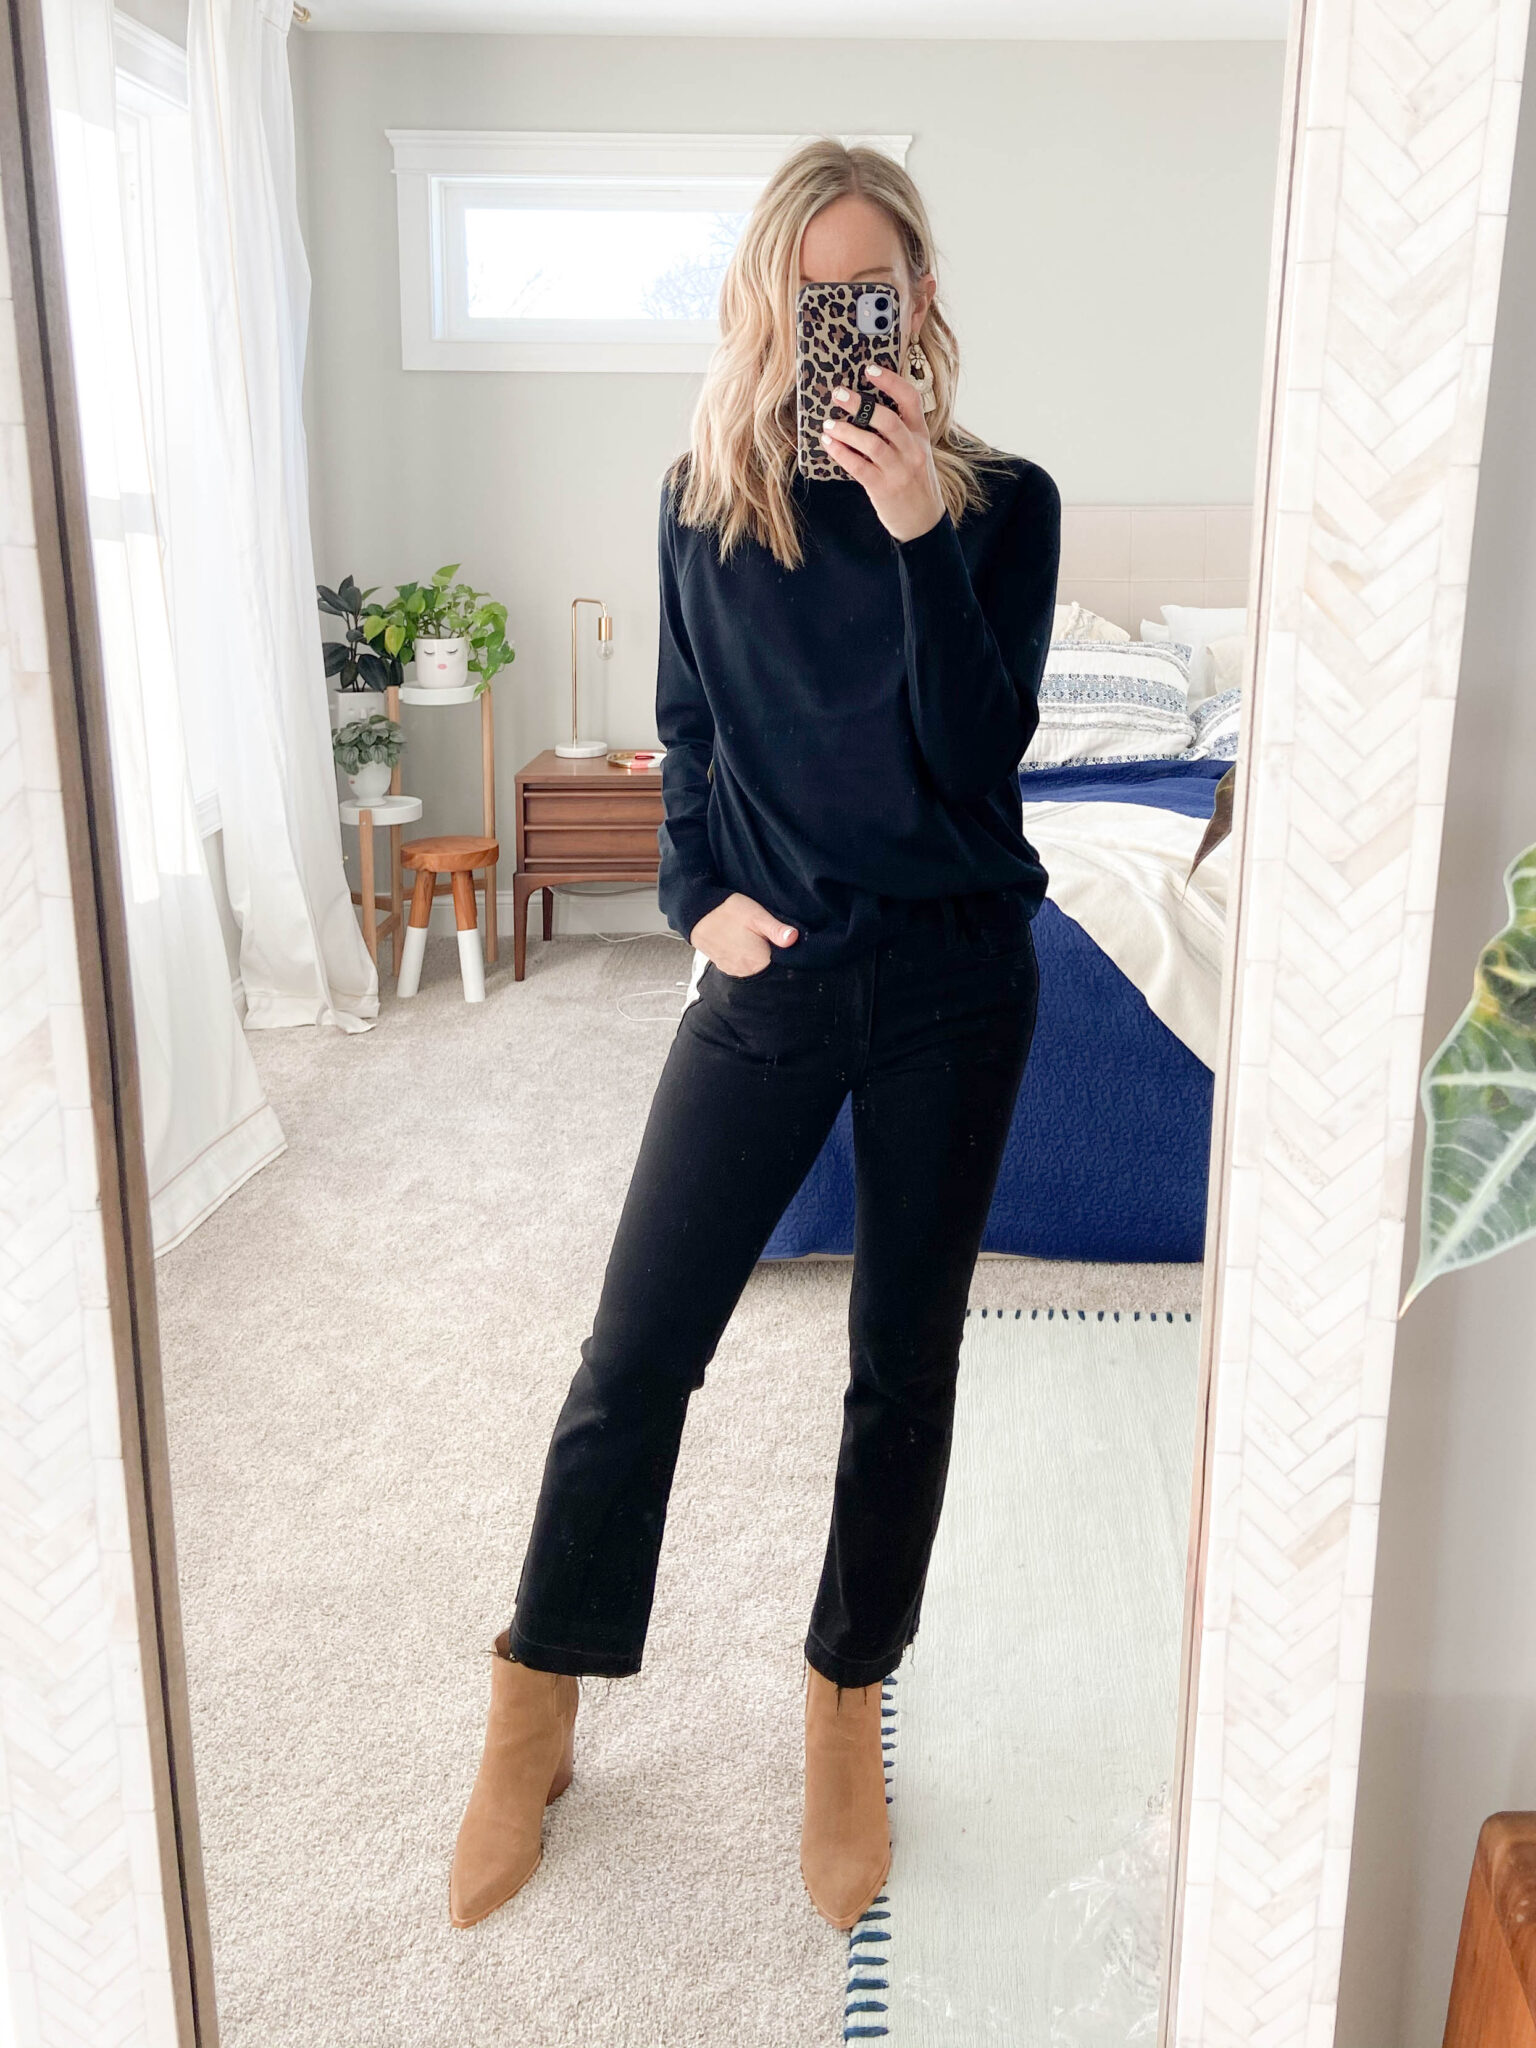 How to Style Boots With Pants | POPSUGAR Fashion